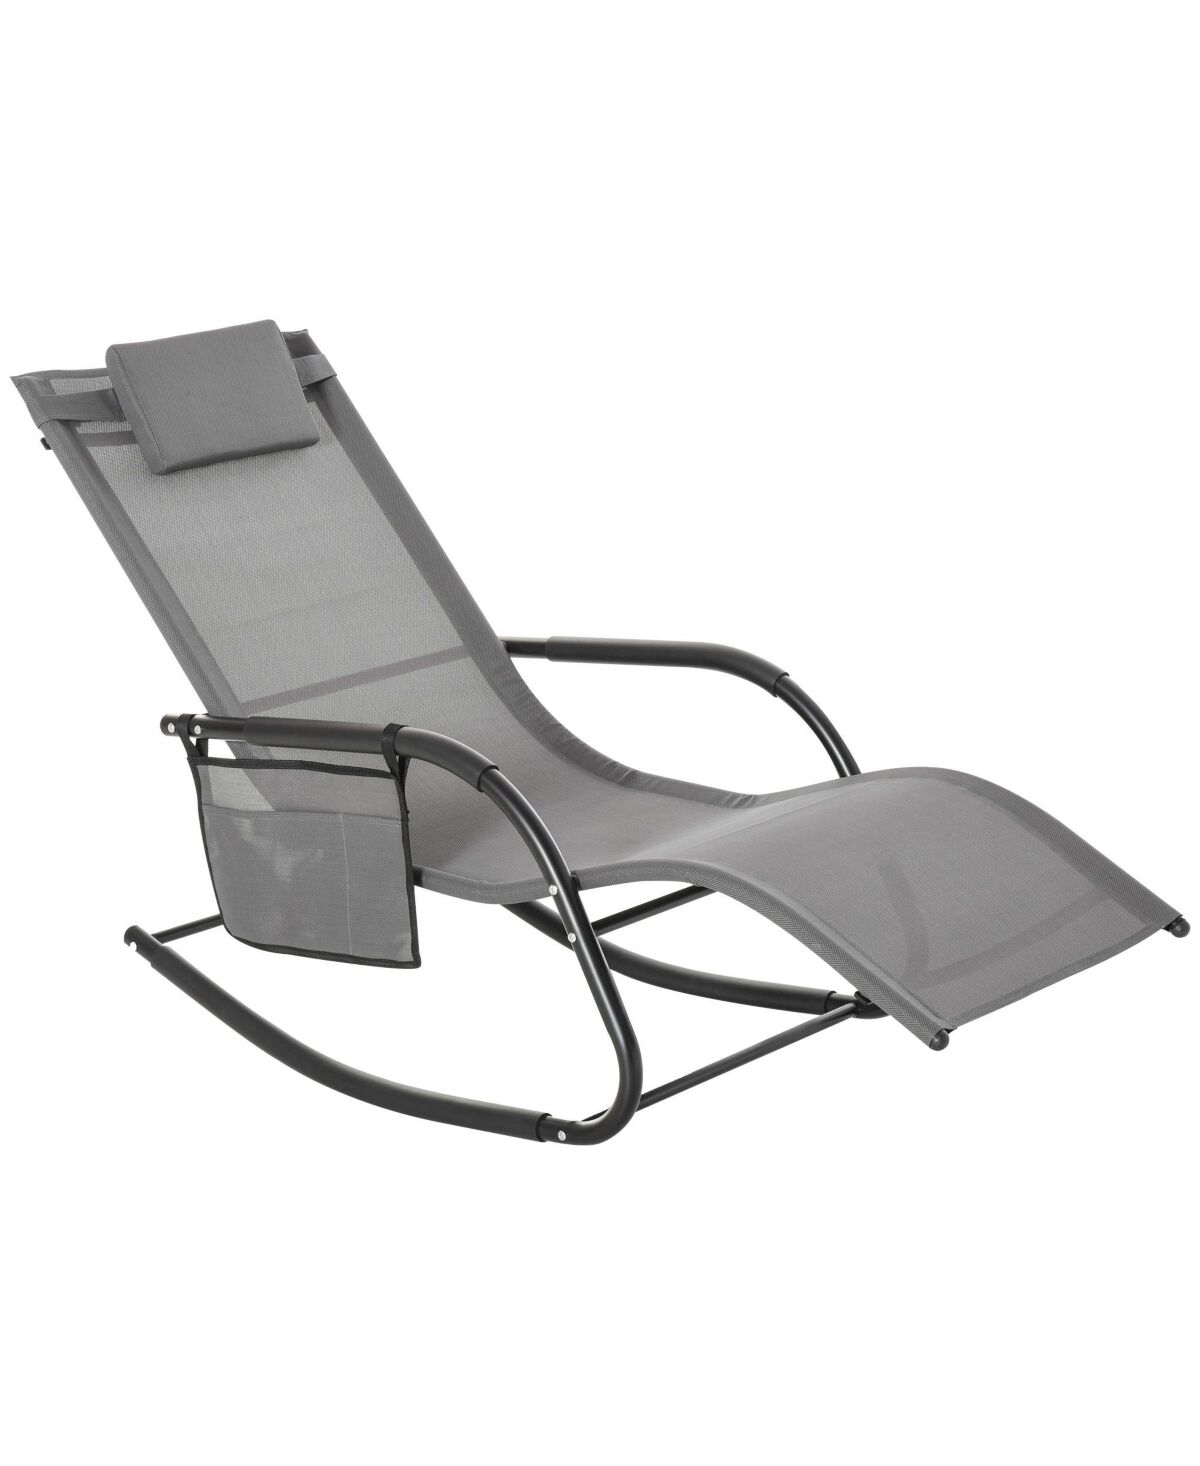 Outsunny Outdoor Rocking Chair, Patio Sling Sun Lounger, Pocket, Recliner Rocker, Lounge Chair with Detachable Pillow for Deck, Garden, or Pool, Grey